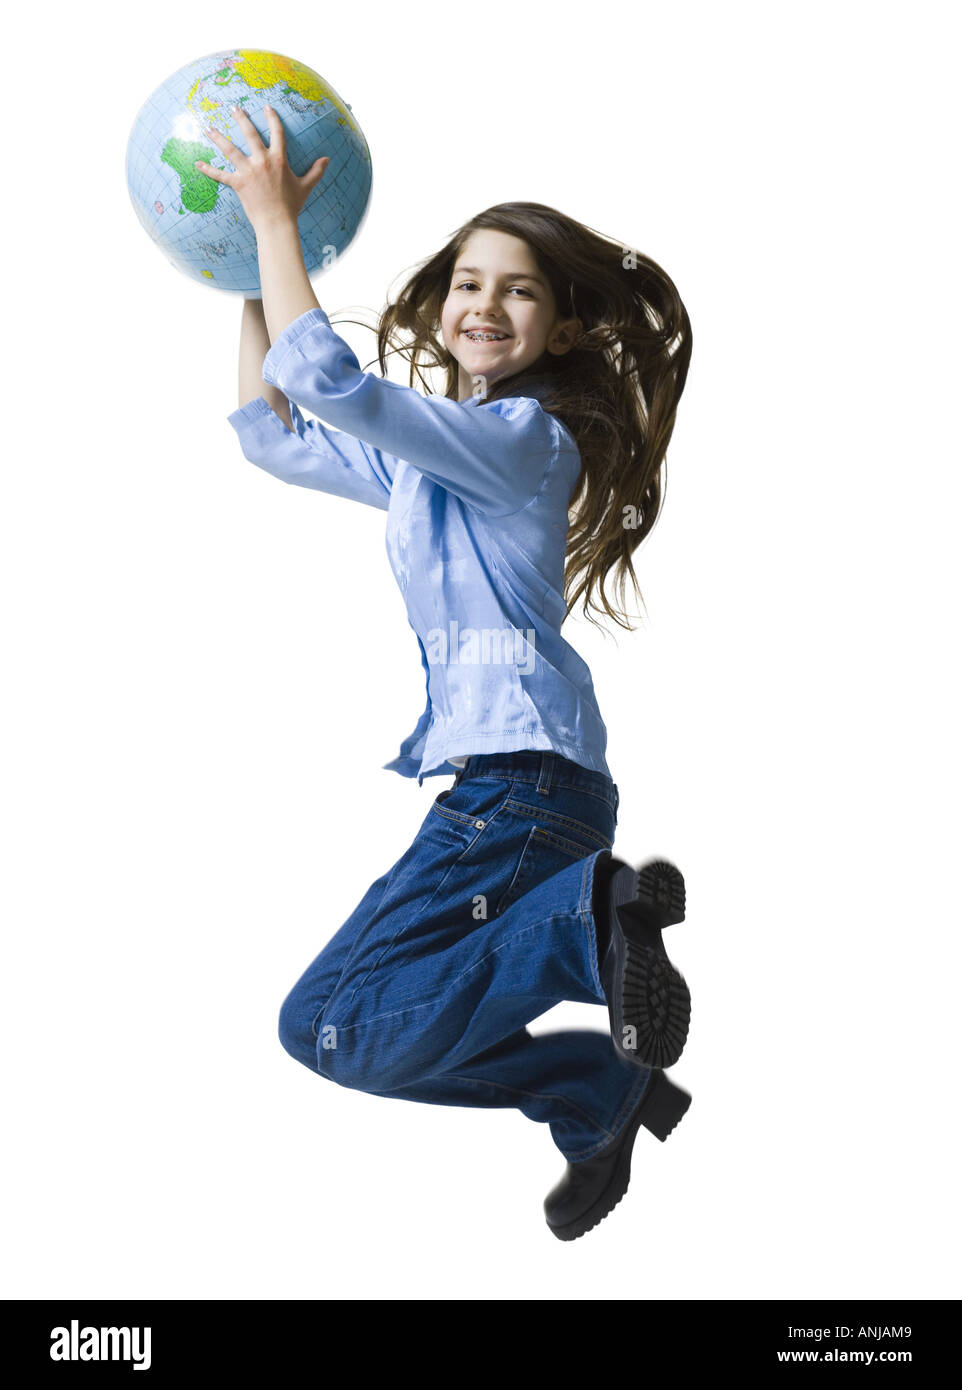 Portrait of a teenage girl jumping holding a globe Stock Photo